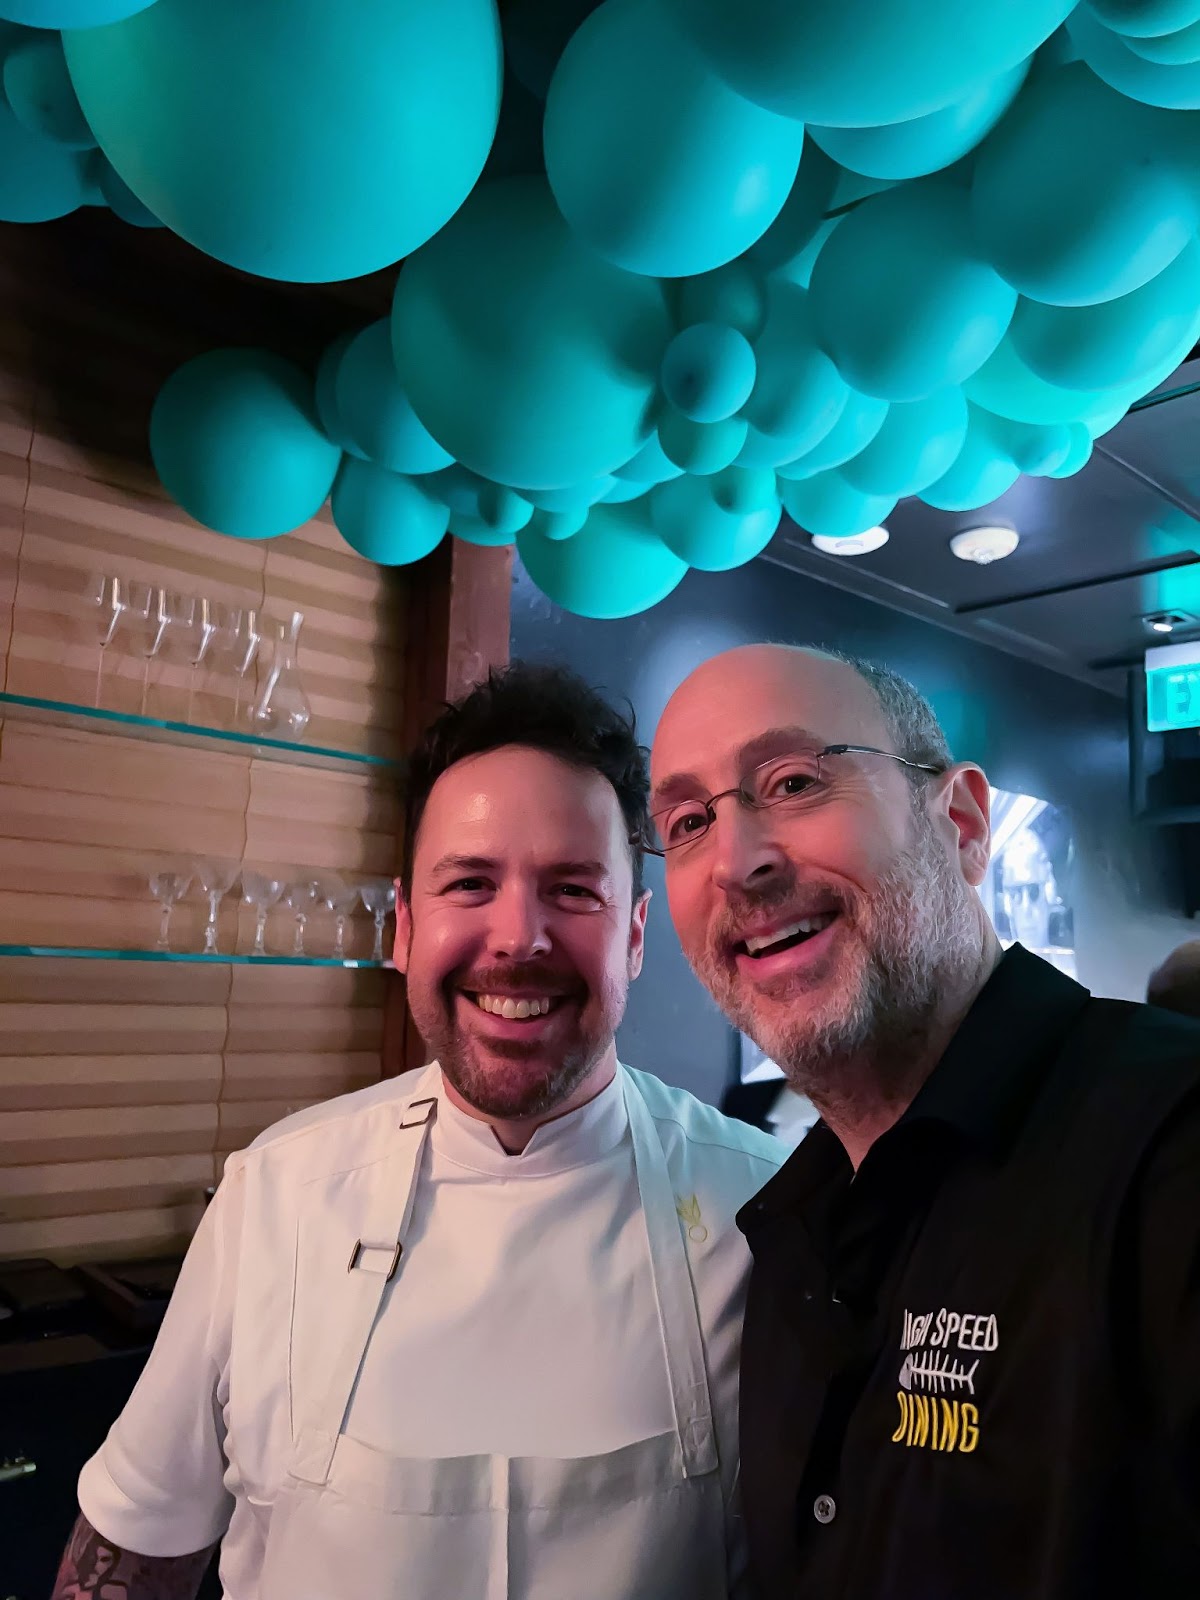 Creating Exciting Food Content With Joel Haas Of High Speed Dining 